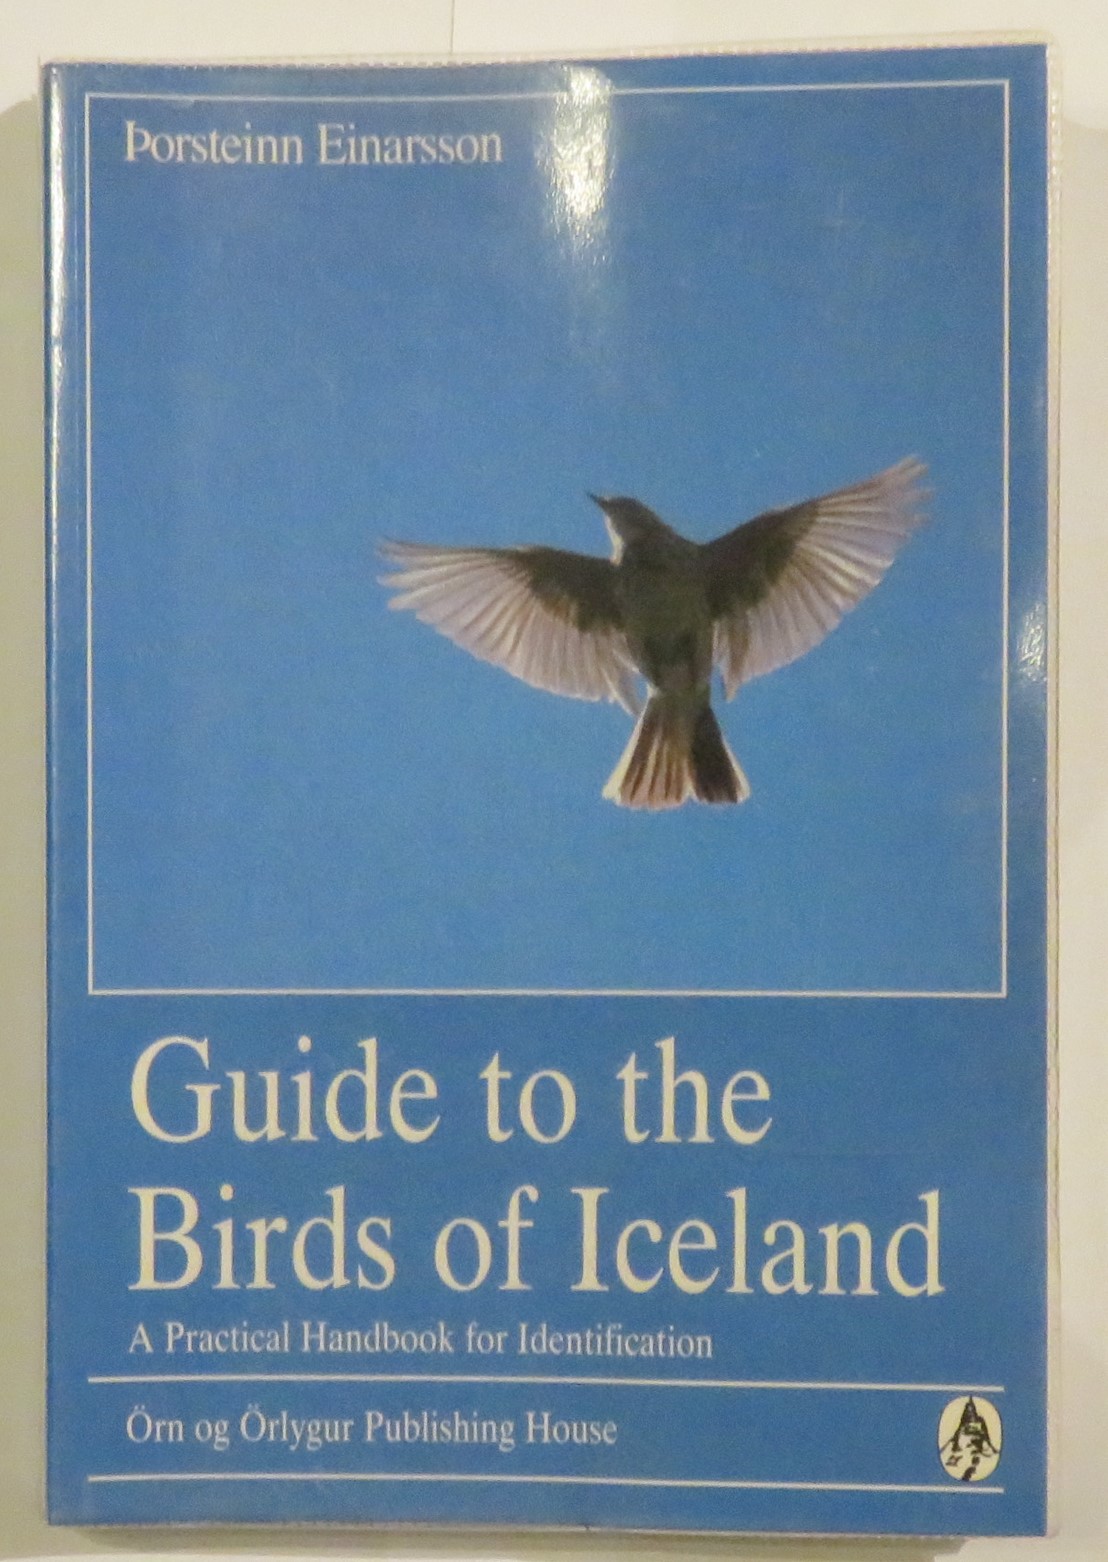 Guide to the Birds of Iceland: A Practical Handbook for Identification